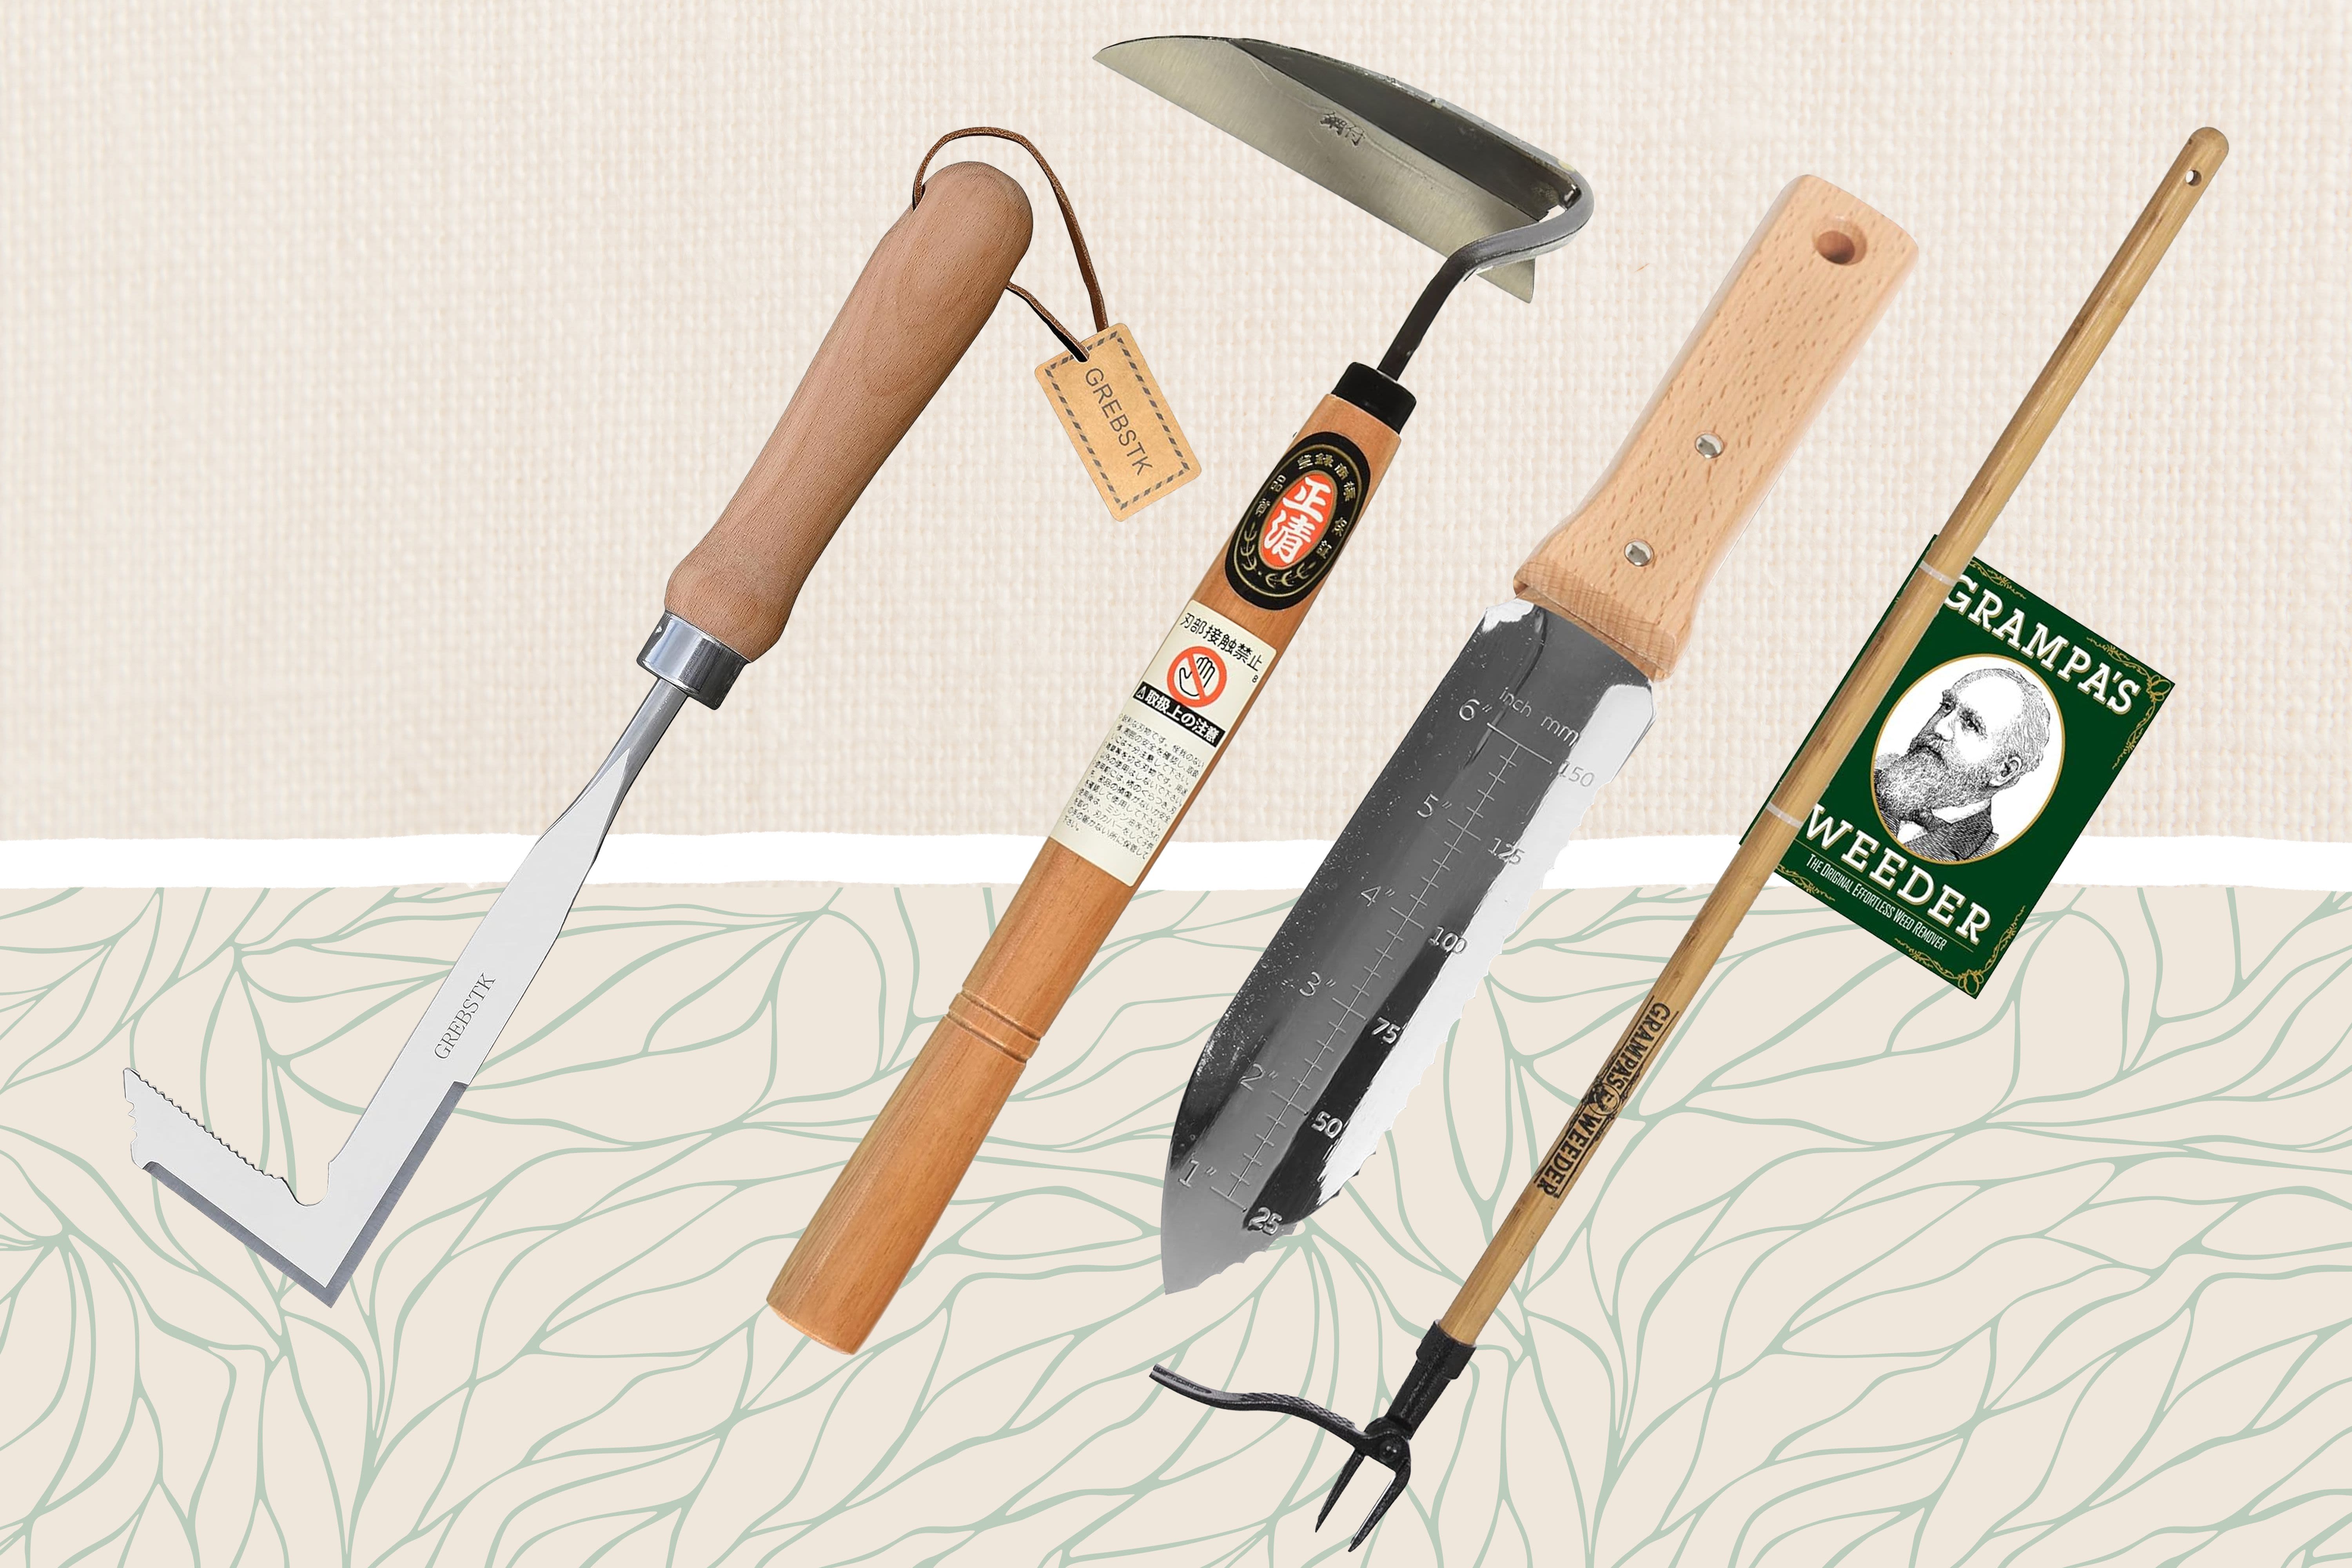 Say Goodbye to Invasive Weeds with Amazon’s Best-Selling Weeding Tools—Starting at $8